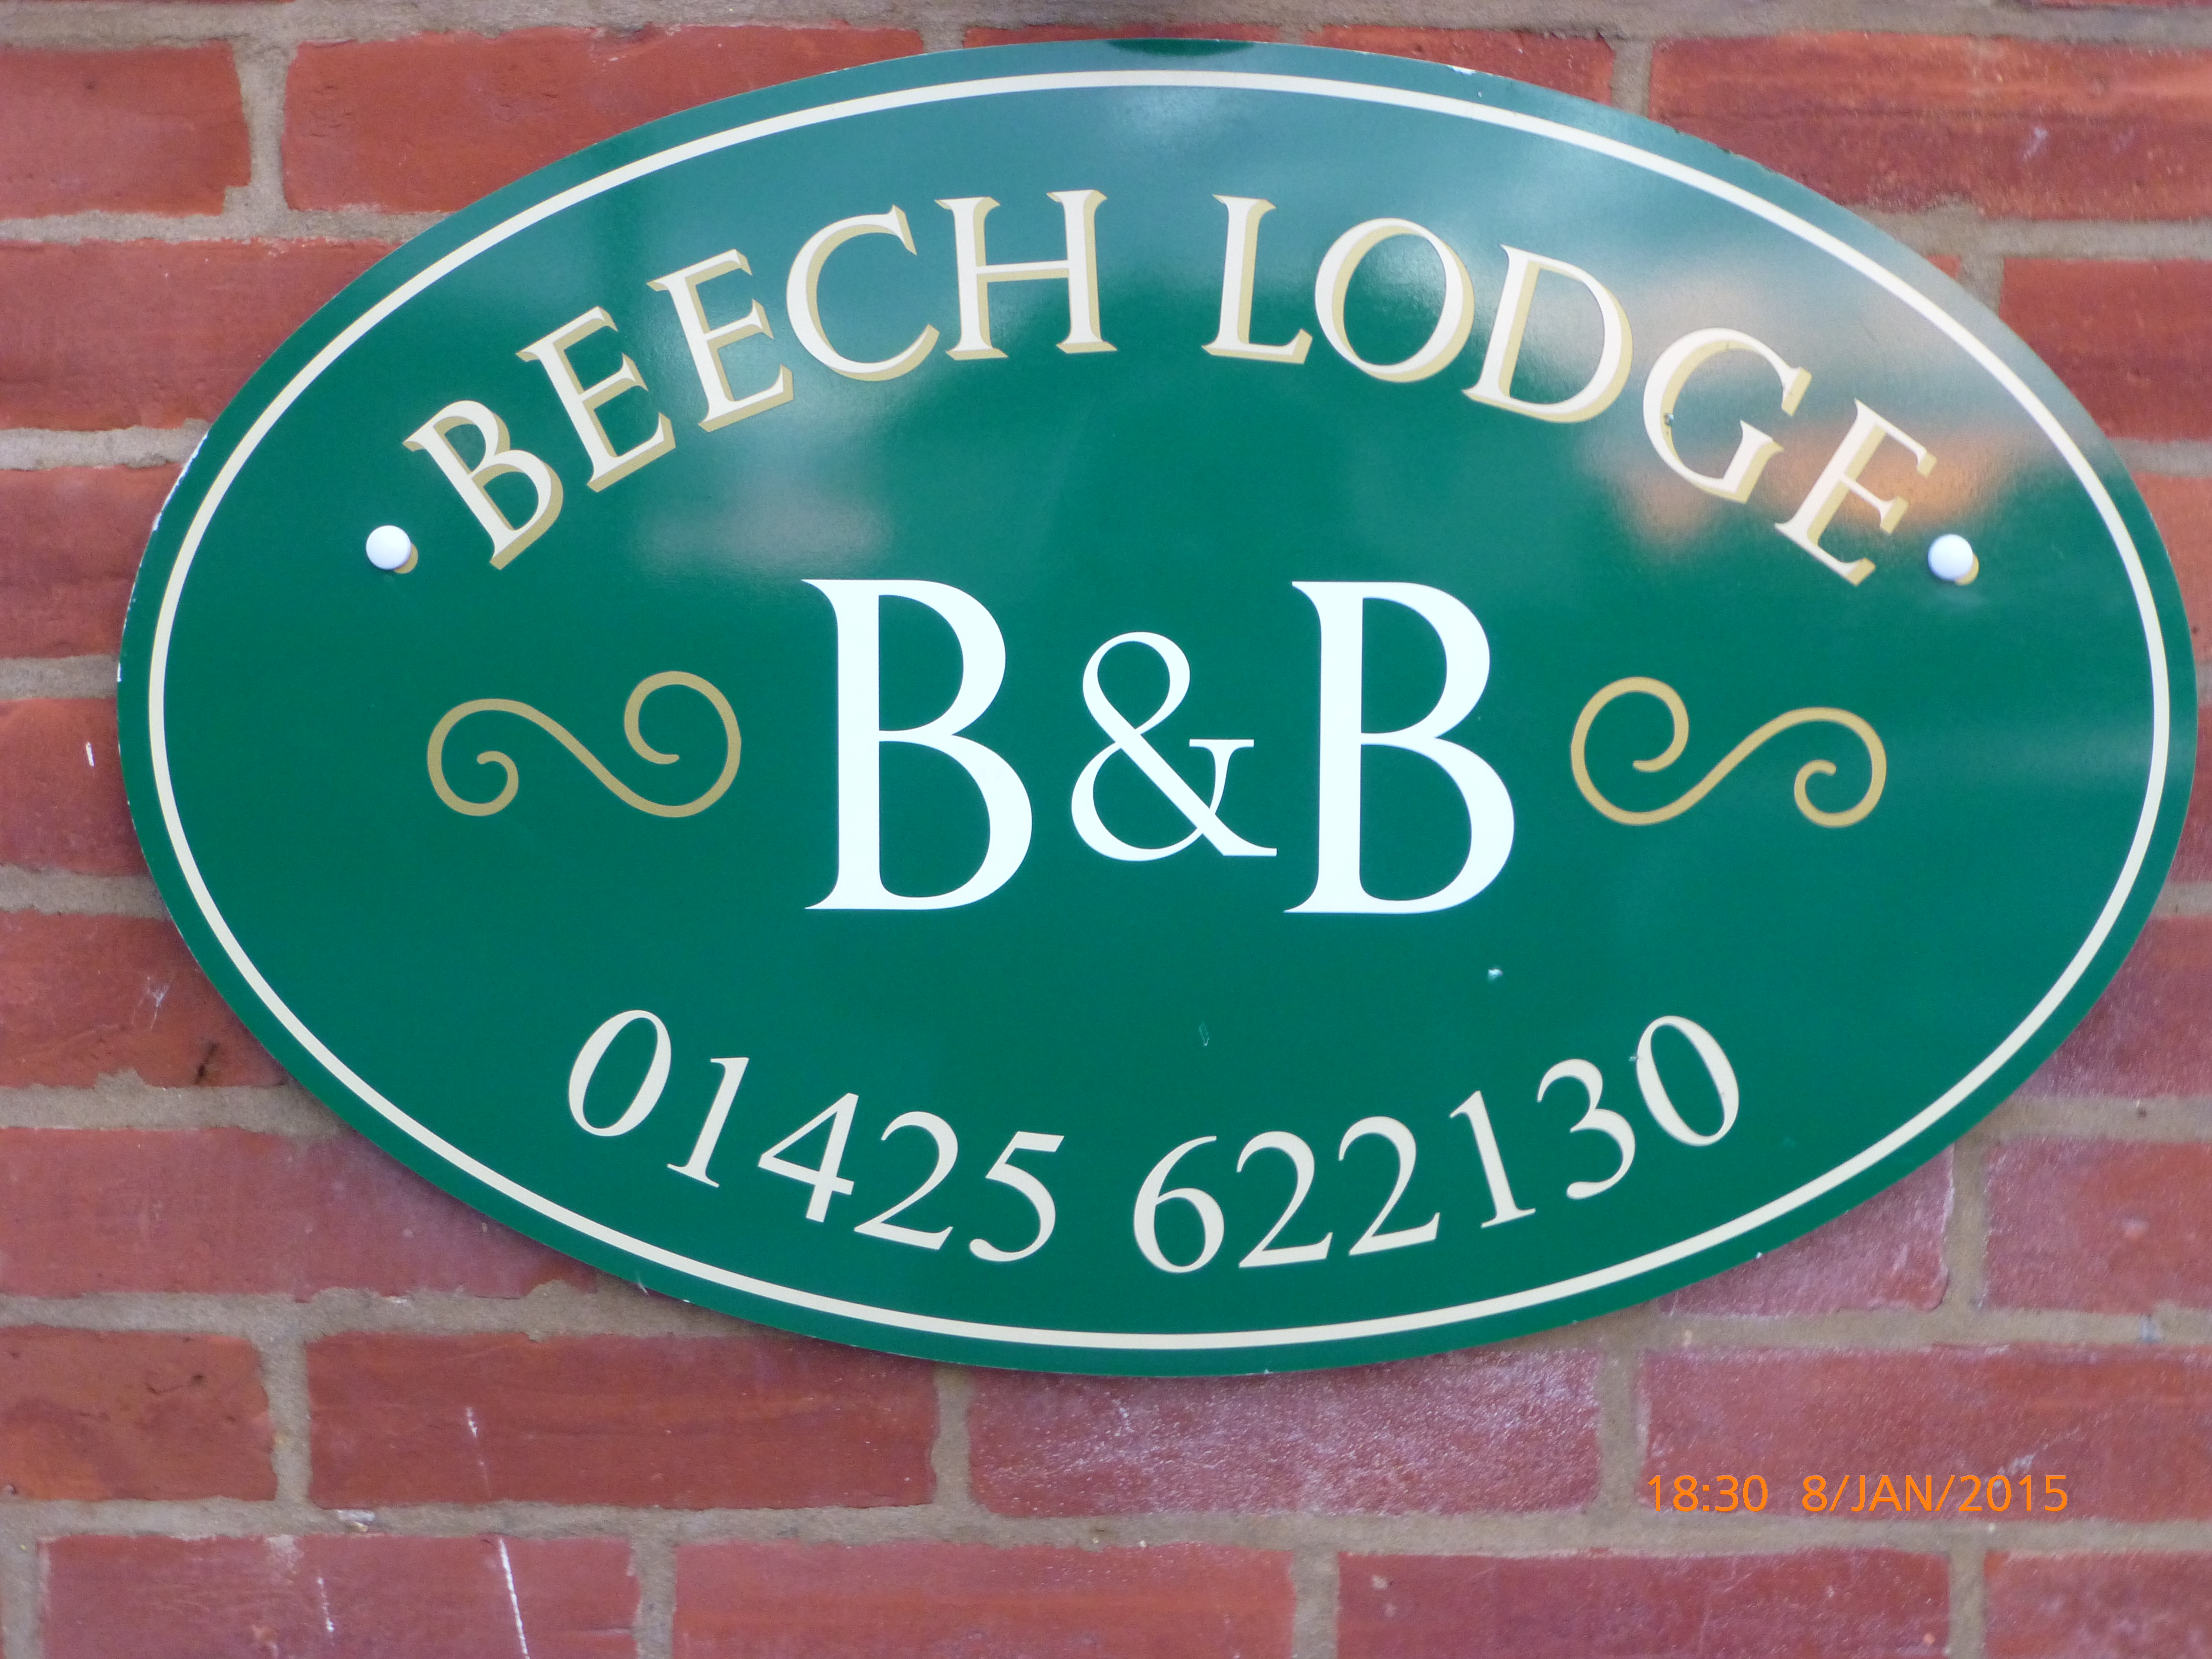 Beech Lodge Bed and Breakfast